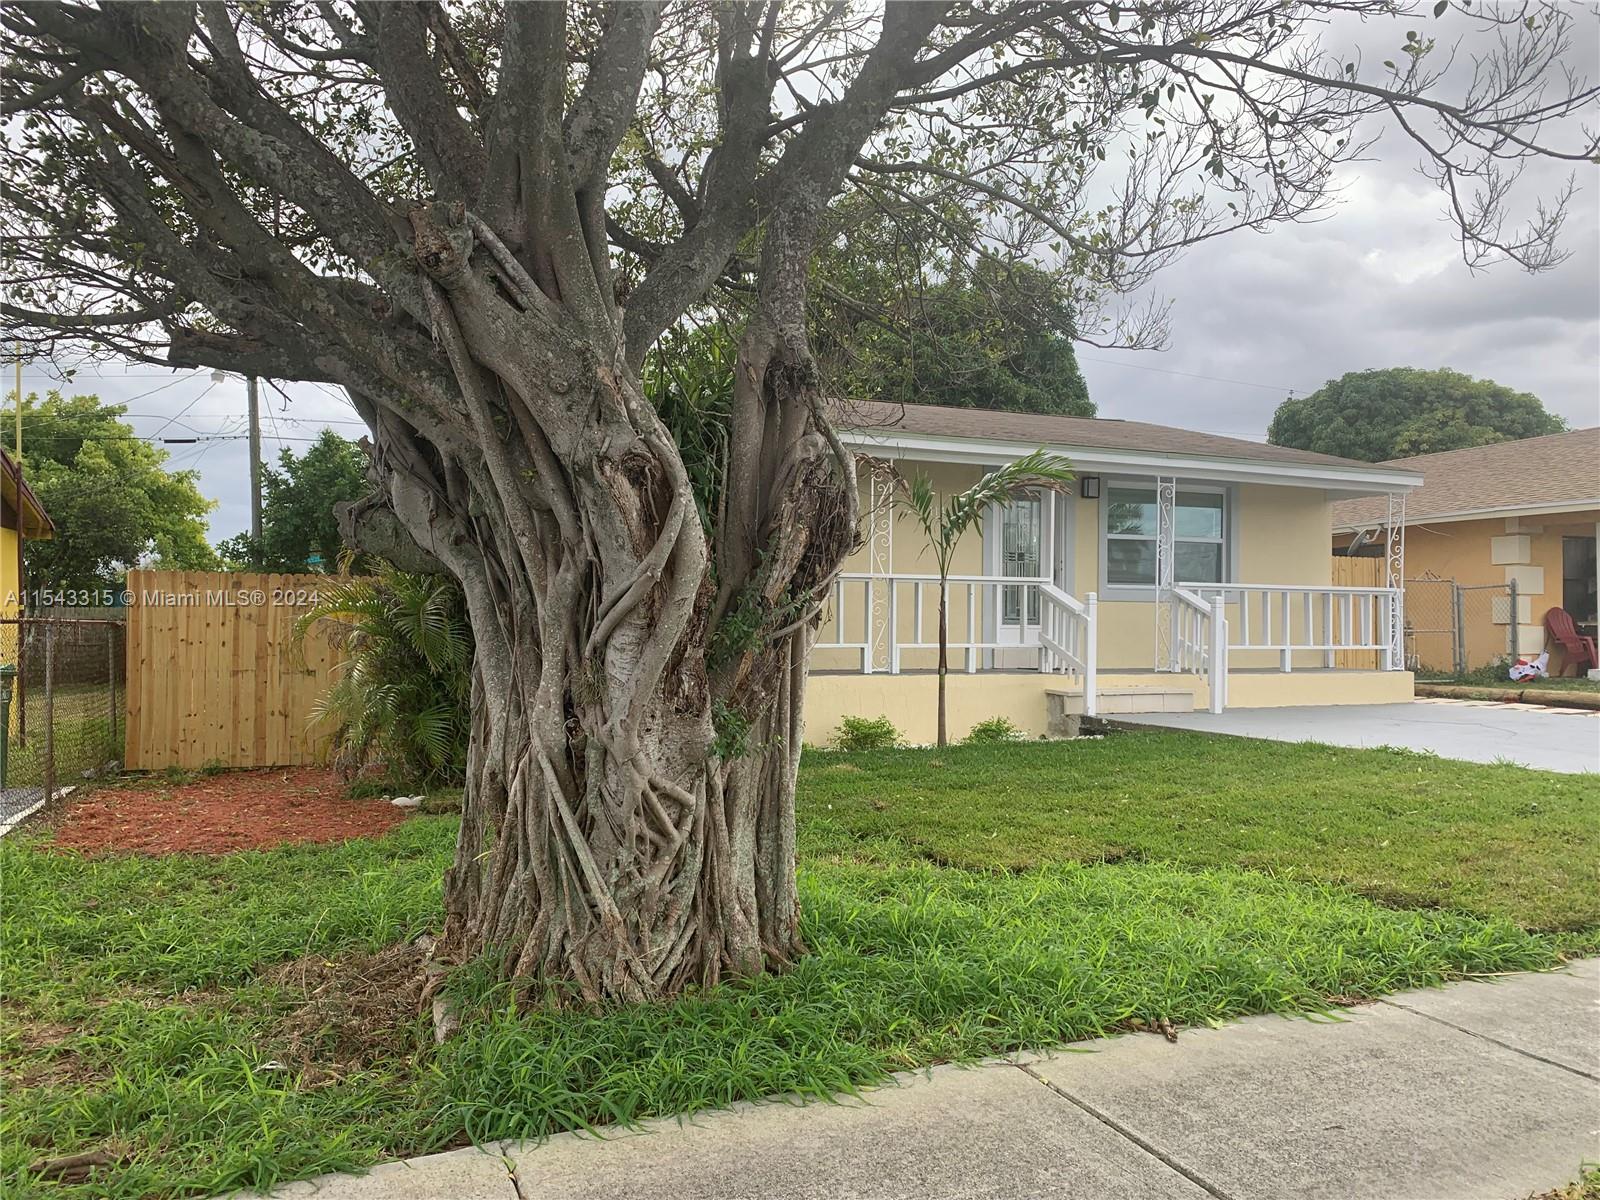 Rental Property at 1141 W 7th St, Riviera Beach, Palm Beach County, Florida - Bedrooms: 2 
Bathrooms: 1  - $2,100 MO.